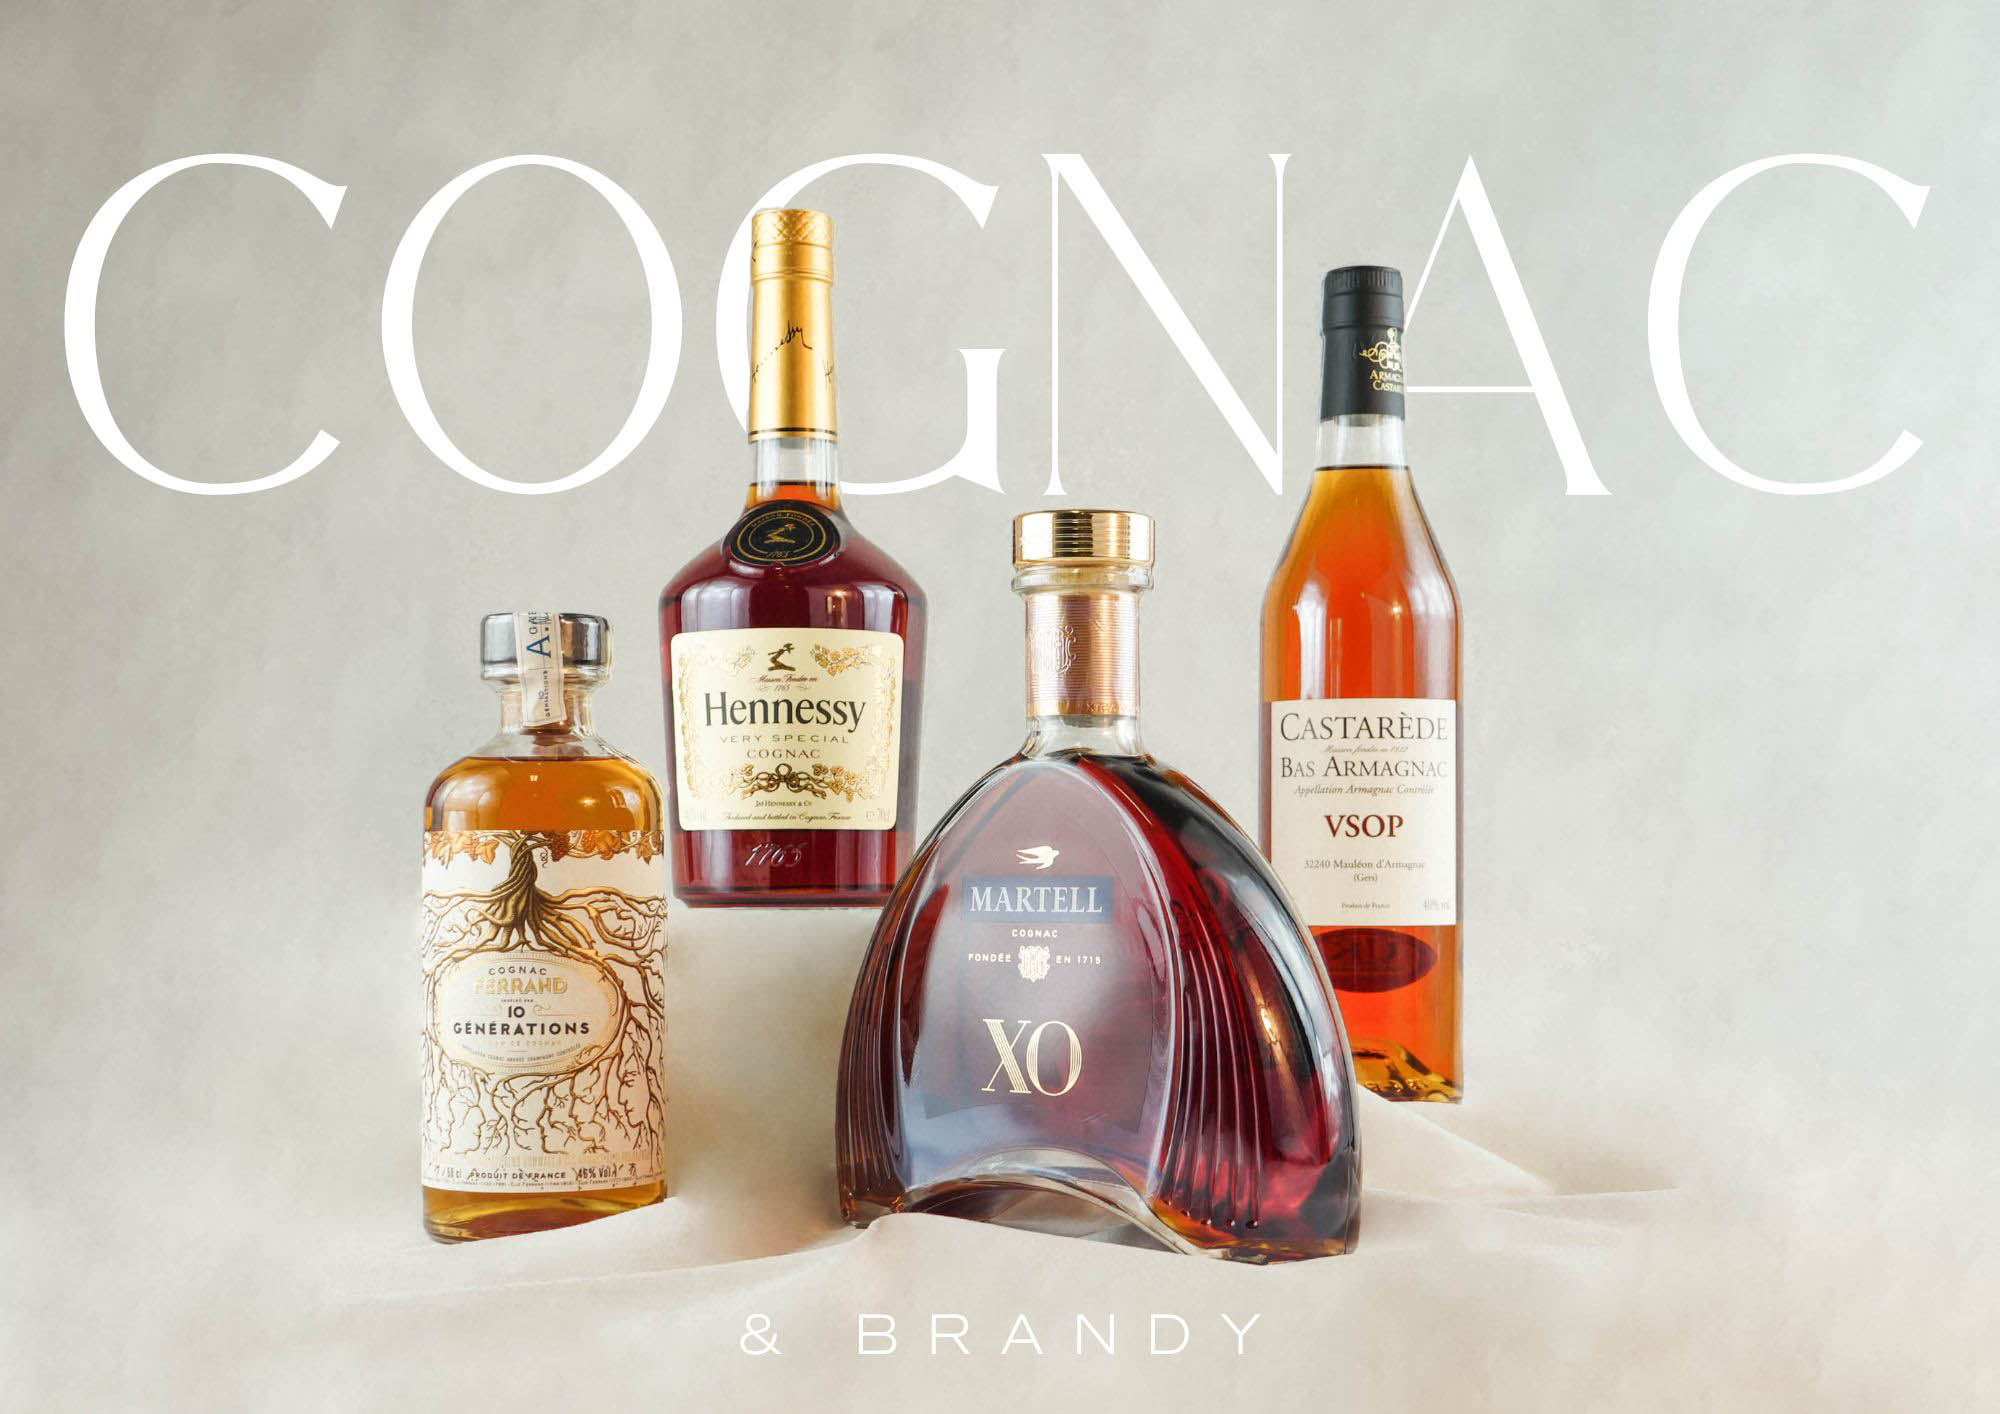 Cognac selection for Black Friday